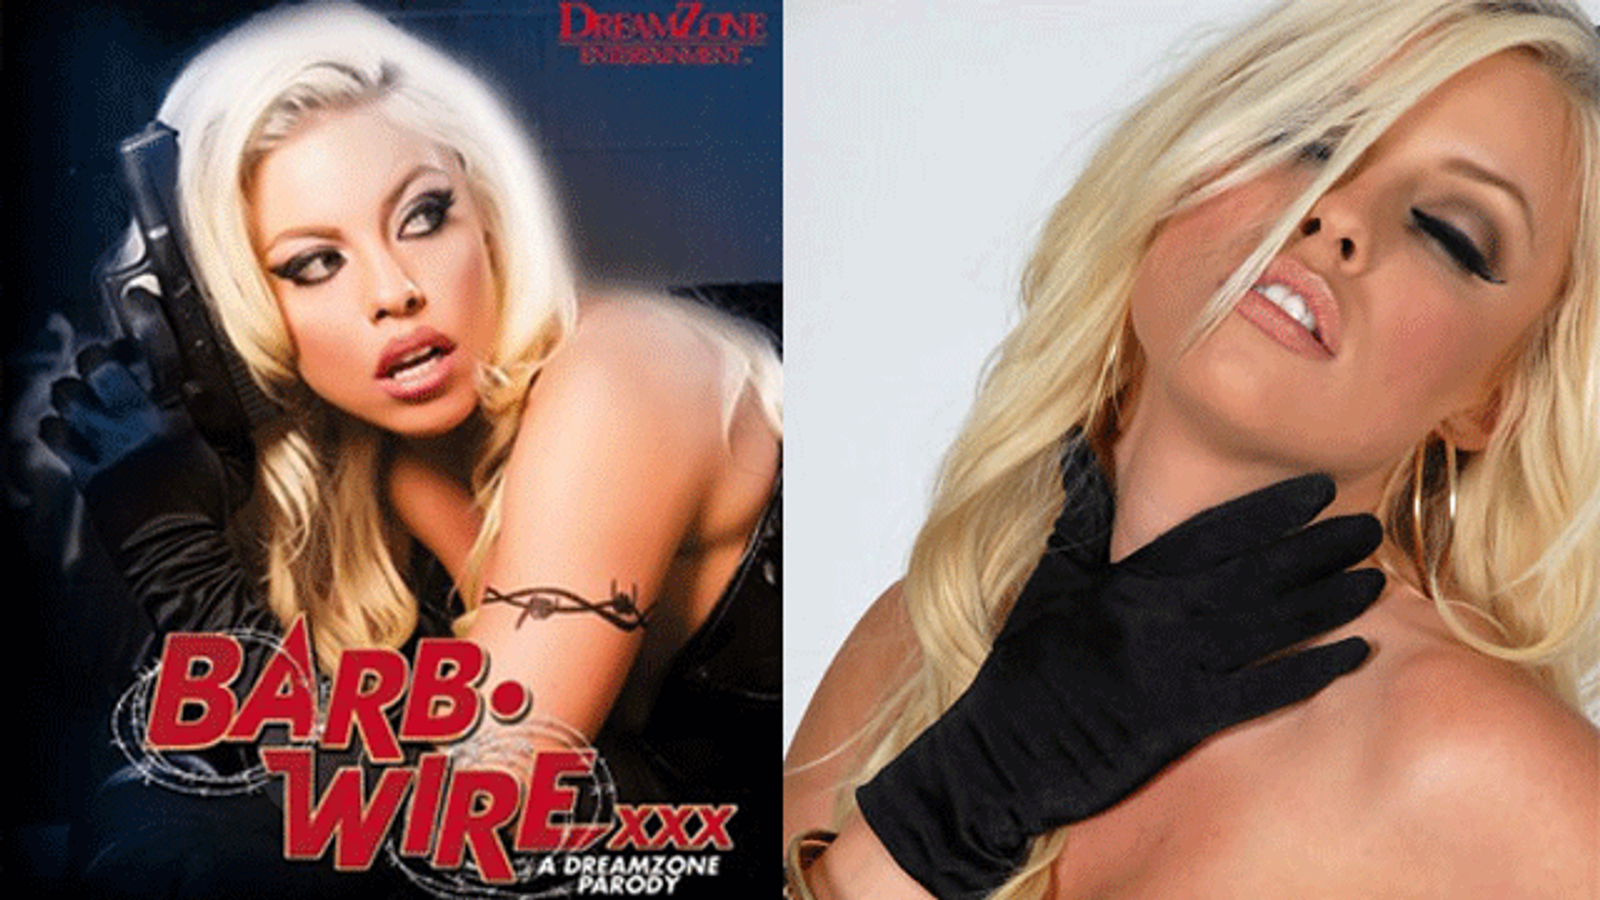 DreamZone to Street 'Barb Wire XXX' in Late March